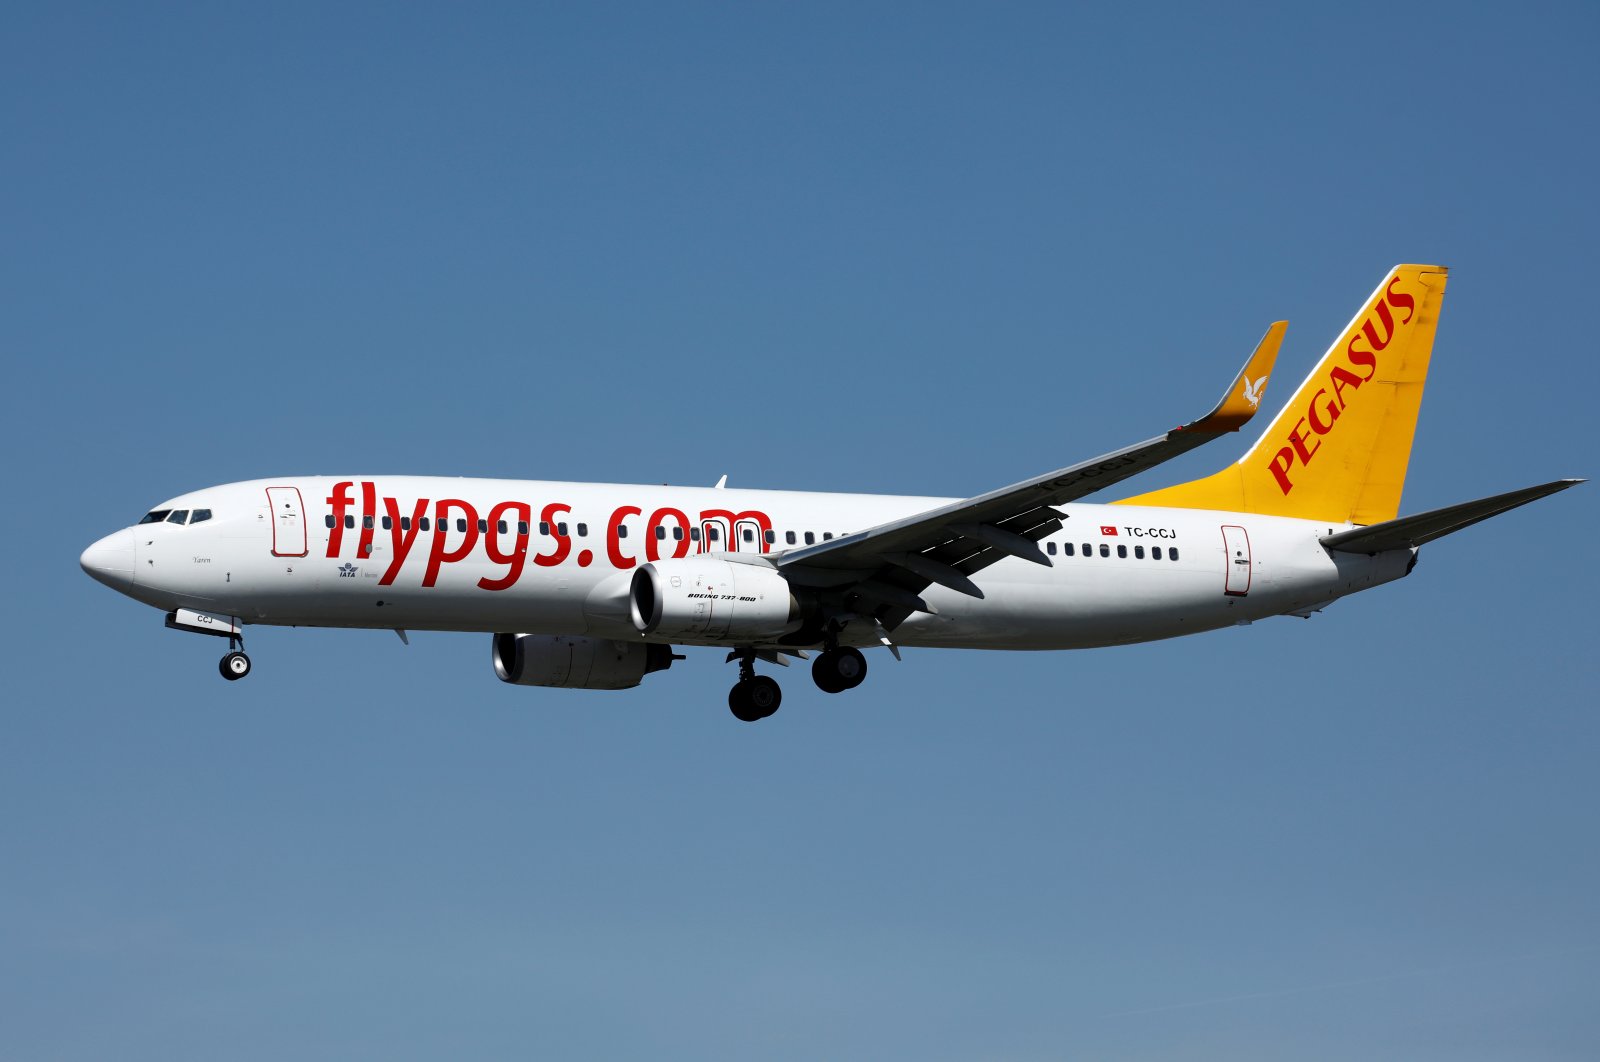 A Boeing 737-800 aircraft, operated by Pegasus Airlines, lands at Orly Airport near Paris, France, Sept. 6, 2019. (Reuters Photo)